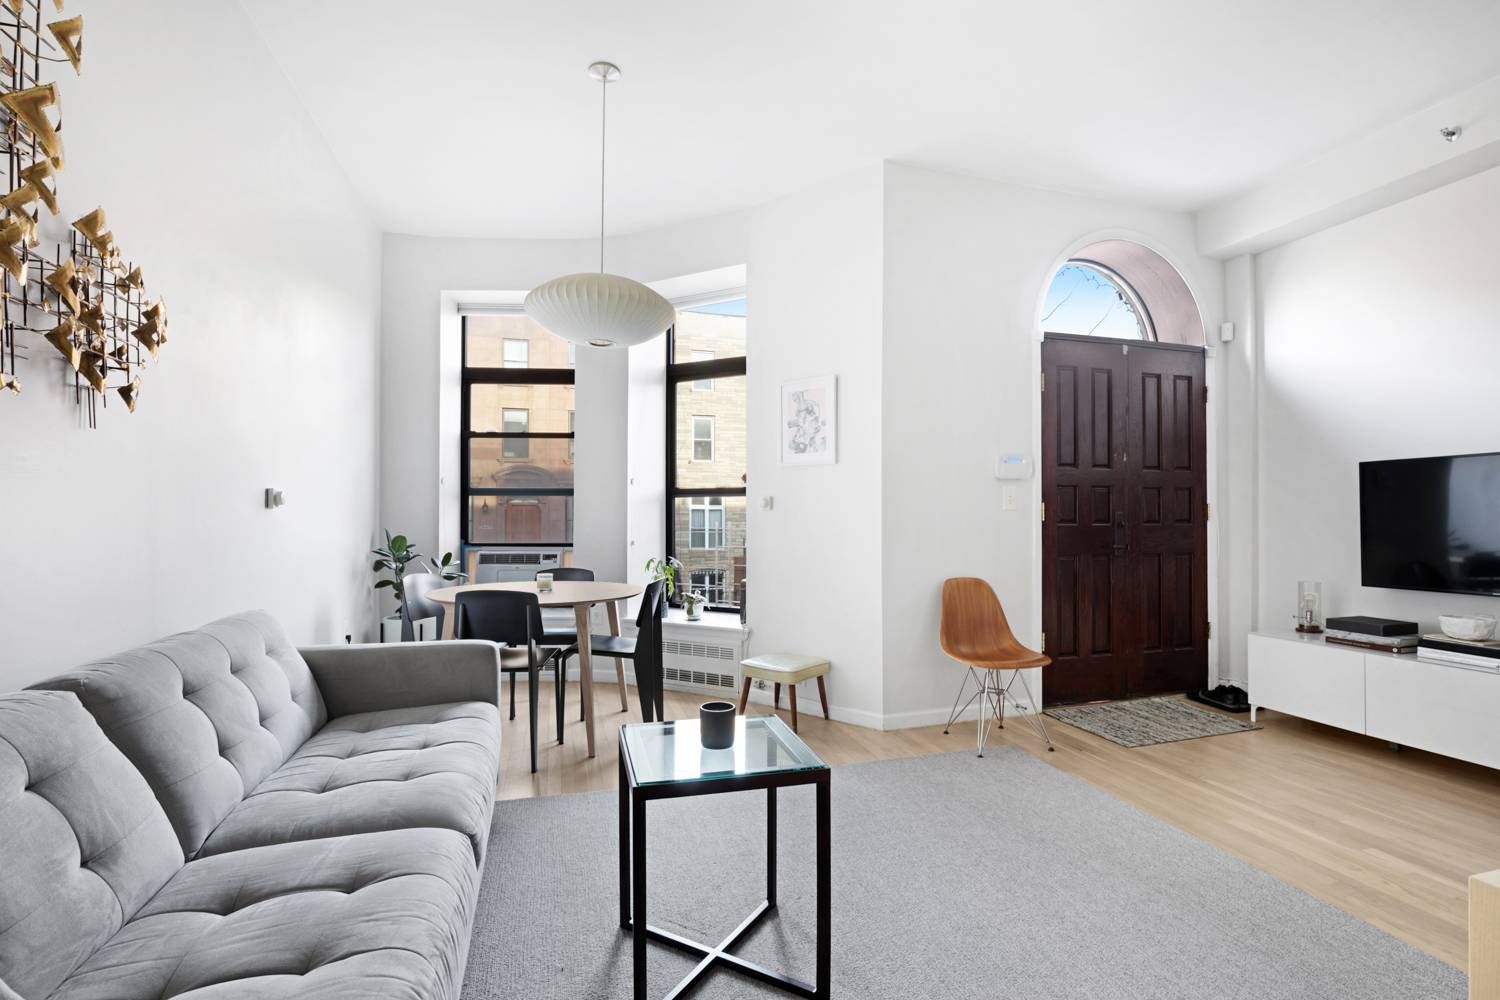 Fully furnished one of a kind, one bedroom loft with 10 ceilings and a private stoop entrance in prime Clinton Hill.